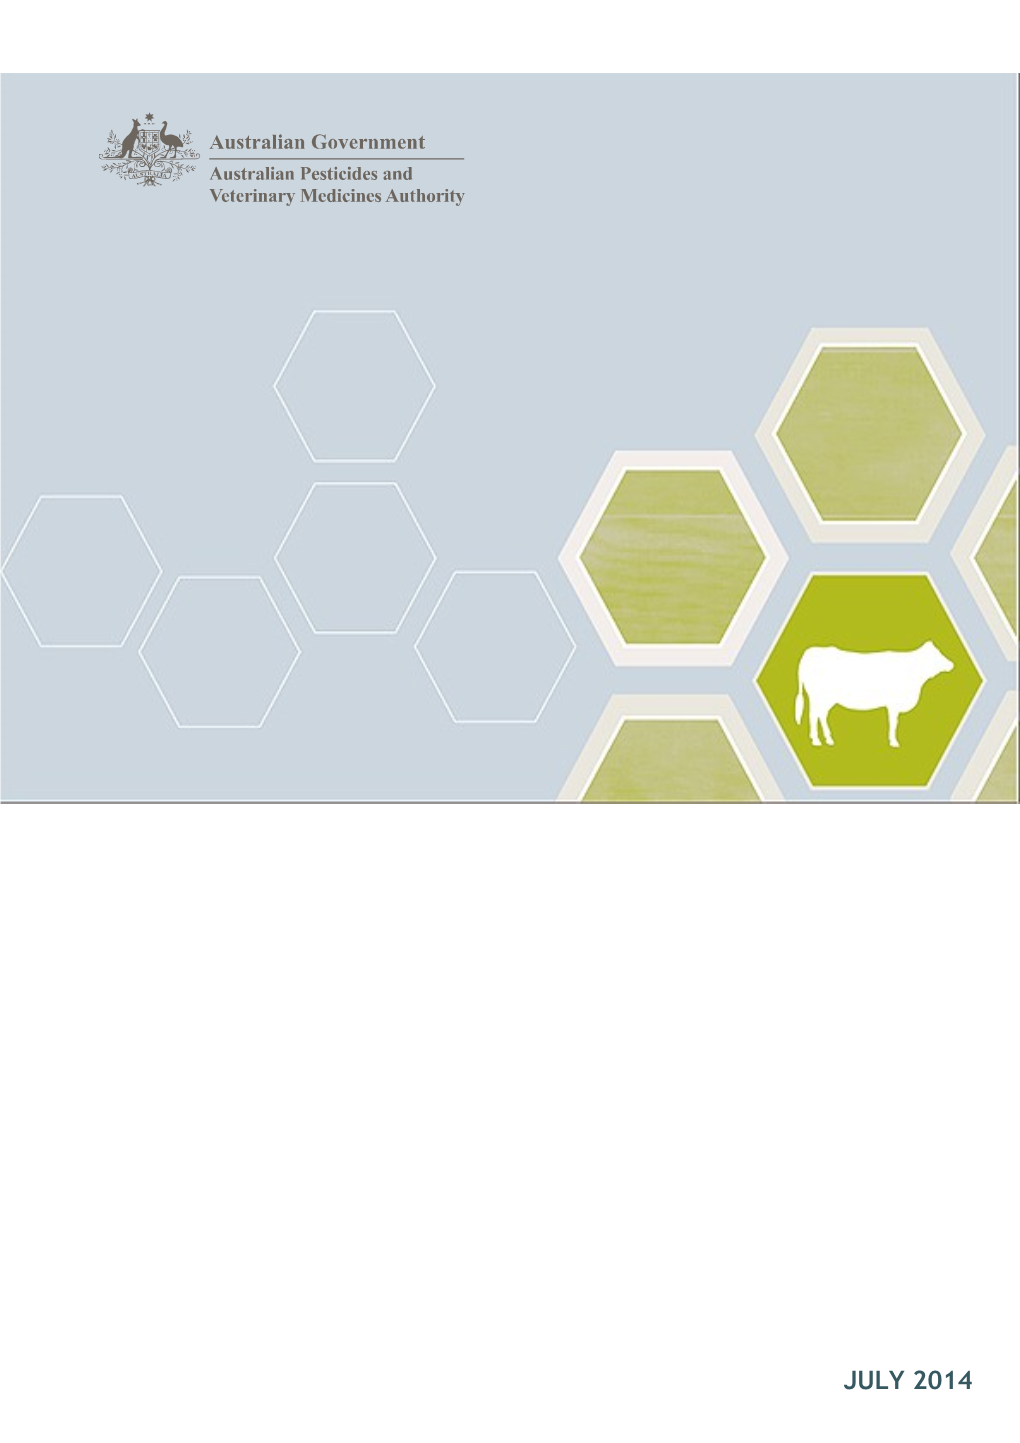 Report of Adverse Experiences for Veterinary Medicines and Agricultural Chemicals - 2013